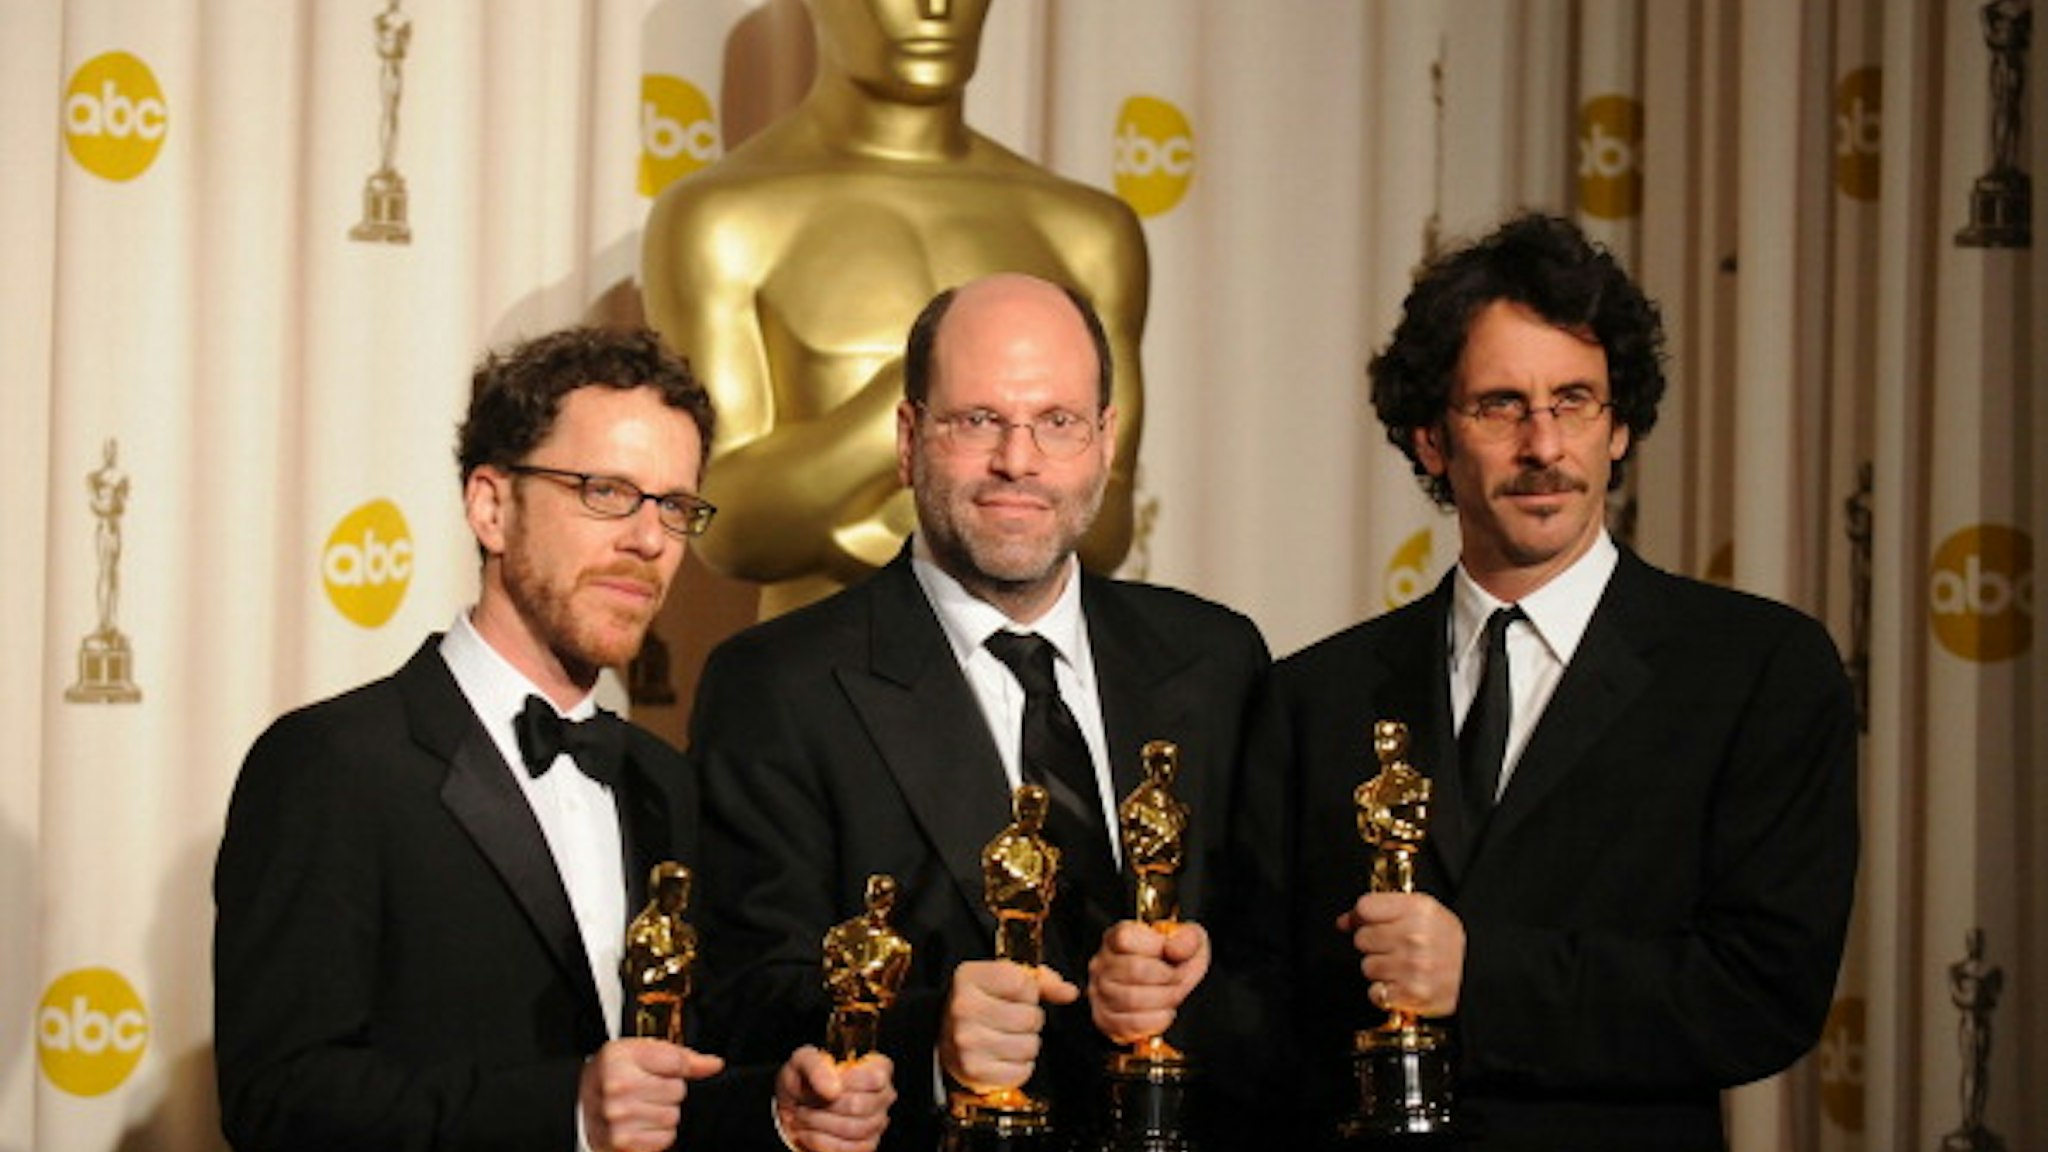 Producers Ethan Coen, Scott Rudin, and Joel Coen poses in the press room during the 80th Annual Academy Awards at the Kodak Theatre on February 24, 2008 in Los Angeles, California.